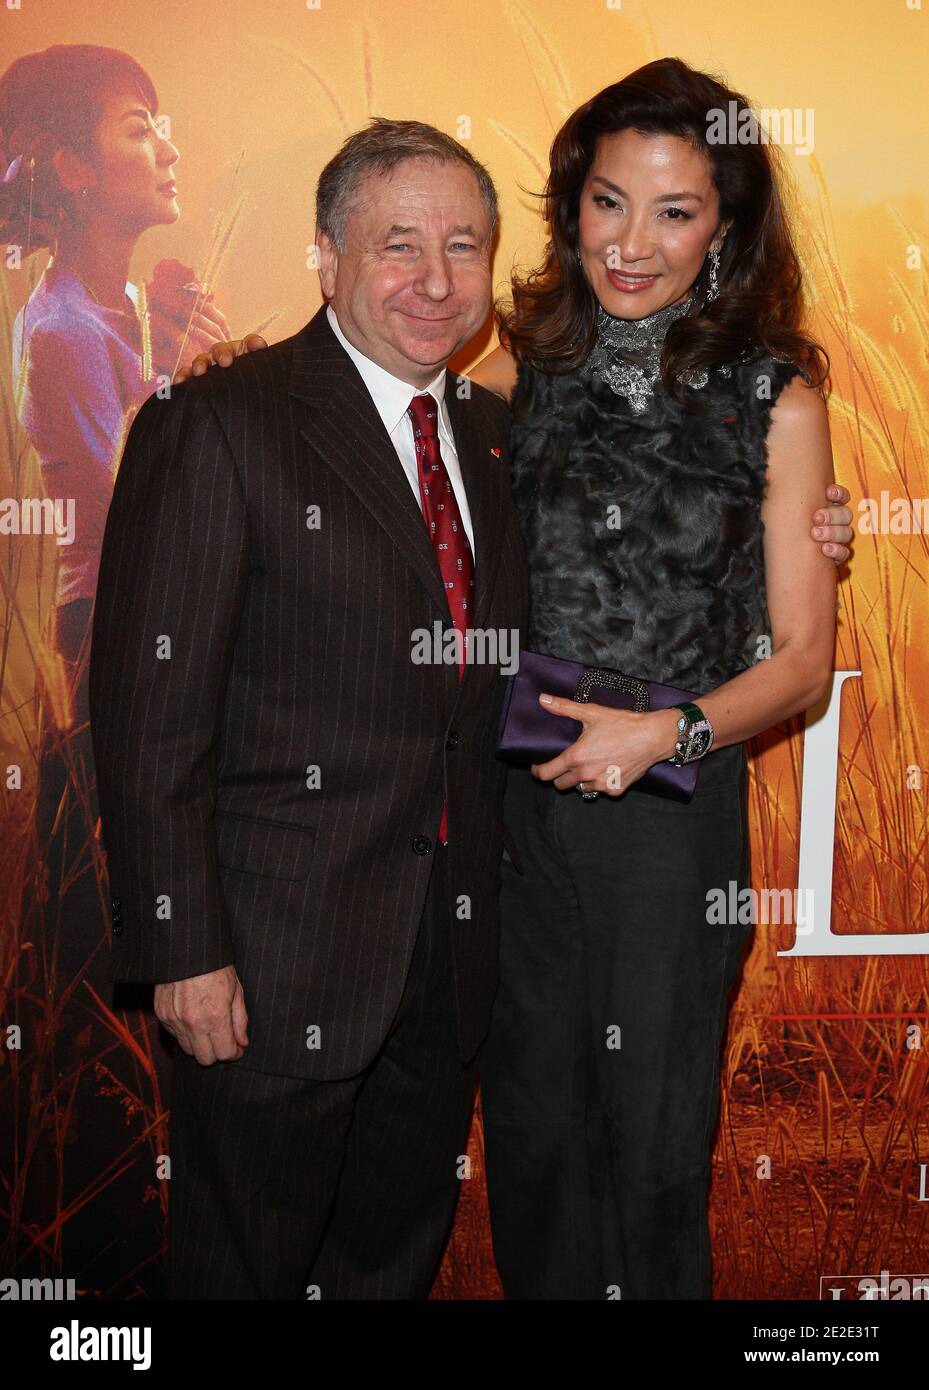 L-R) Michelle Yeoh and her husband Jean Todt posing during the premiere of  'The Lady' held